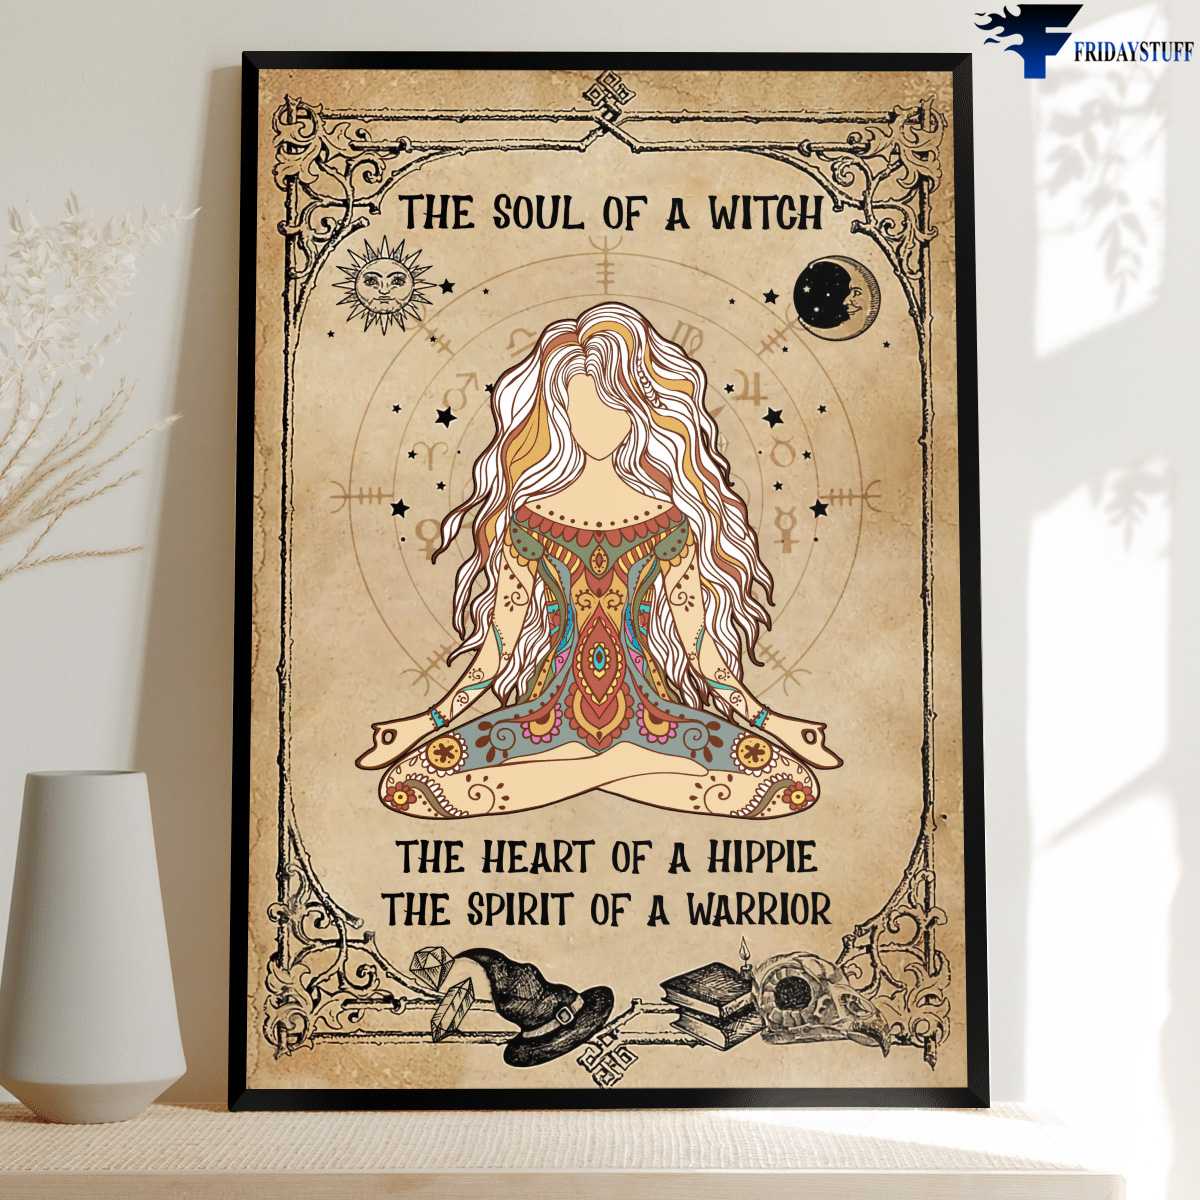 Yoga Girl, Halloween Poster, The Soul Of Witch, The Heart Of A Hippie, The Spirit Of A Warrior